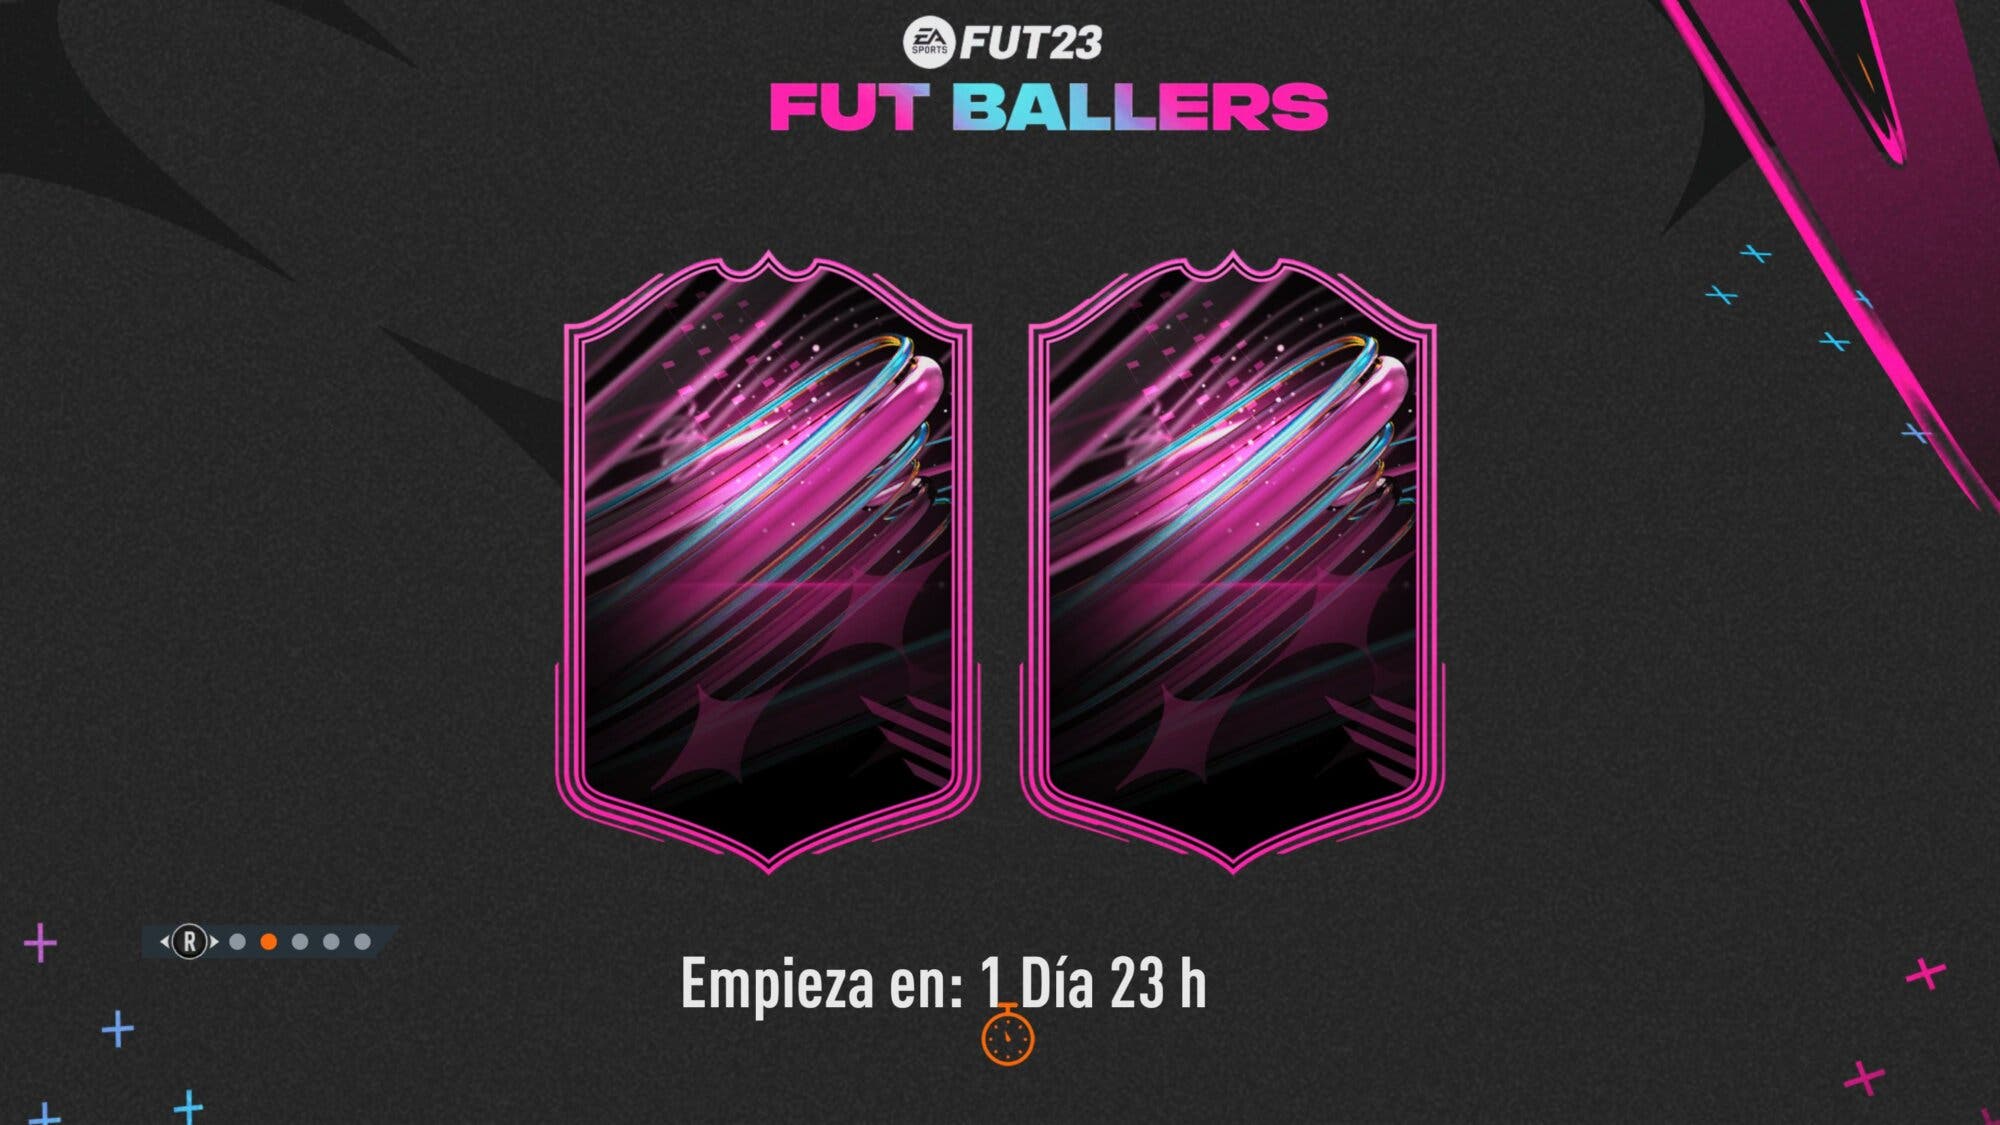 FIFA 23: These could be some of the keys to the new event (FUT Ballers)